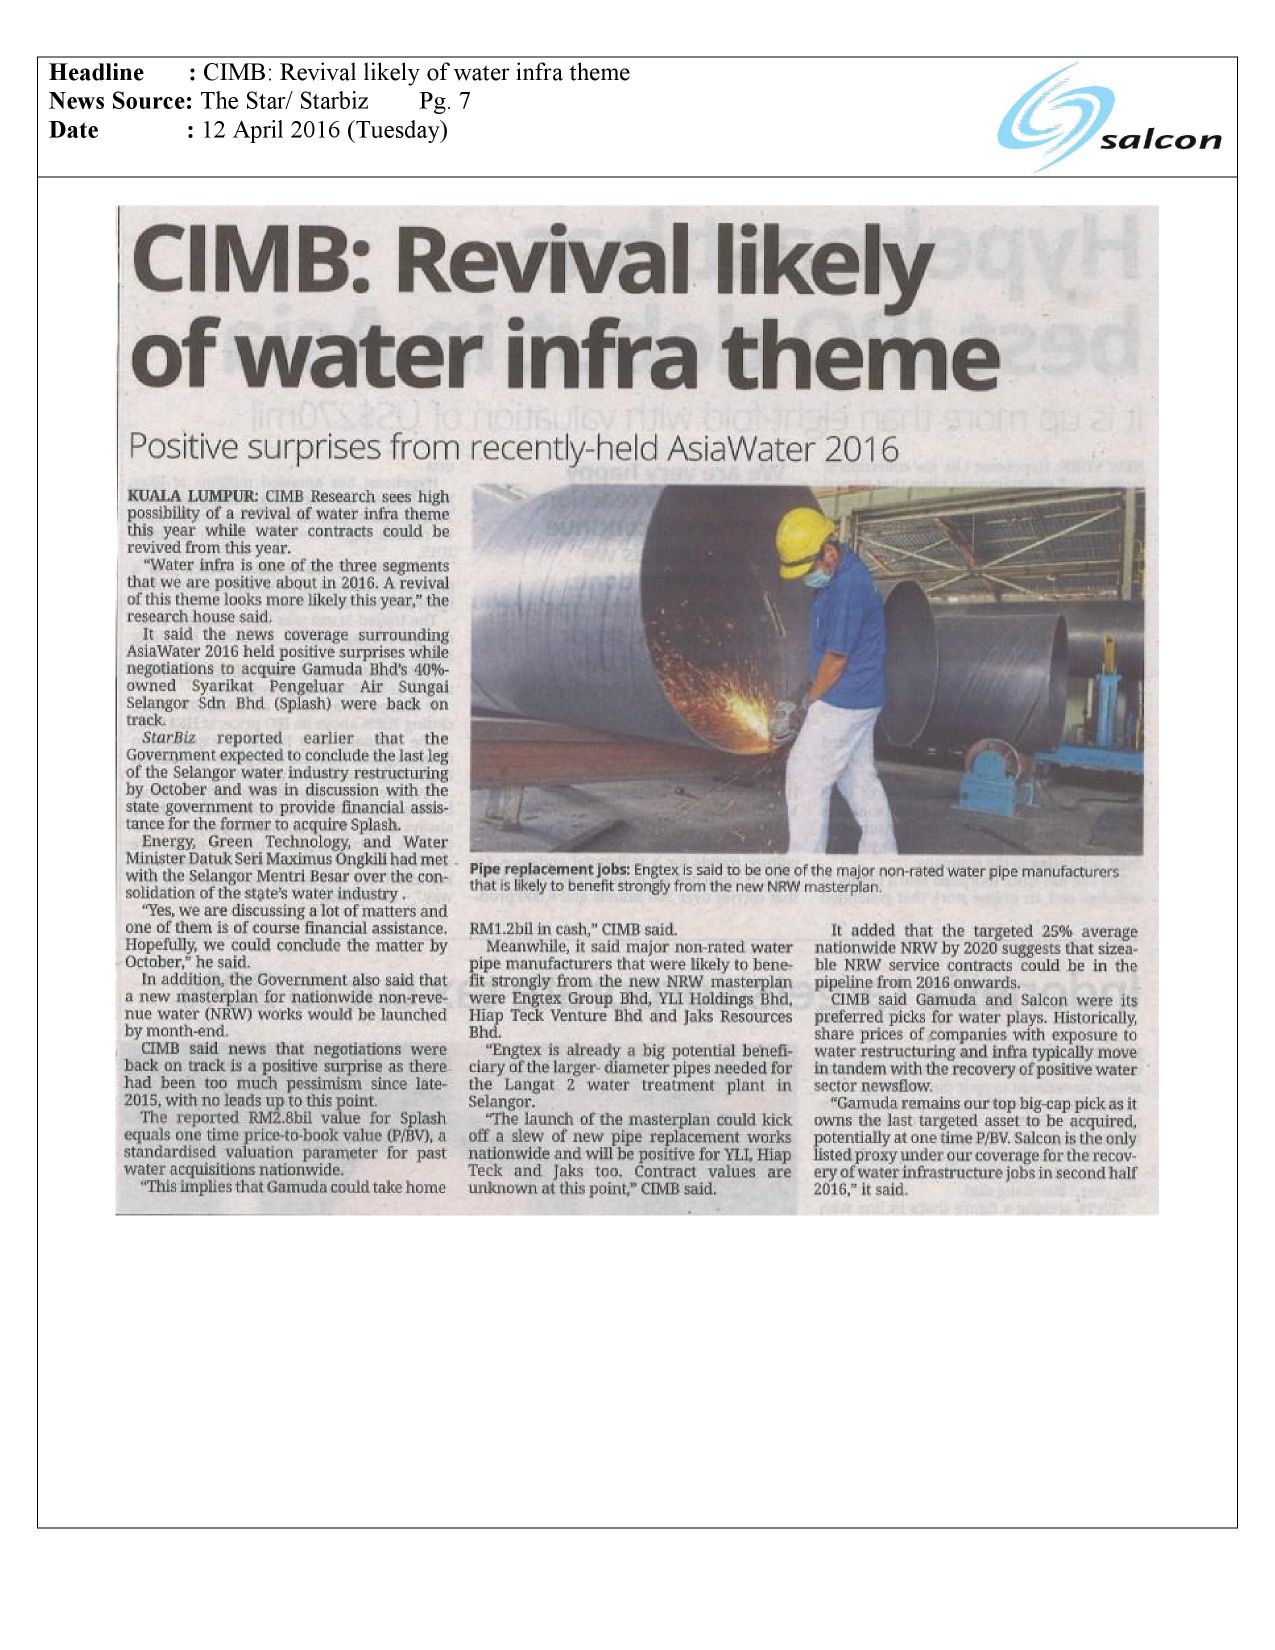 CIMB: Revival likely of water infra theme